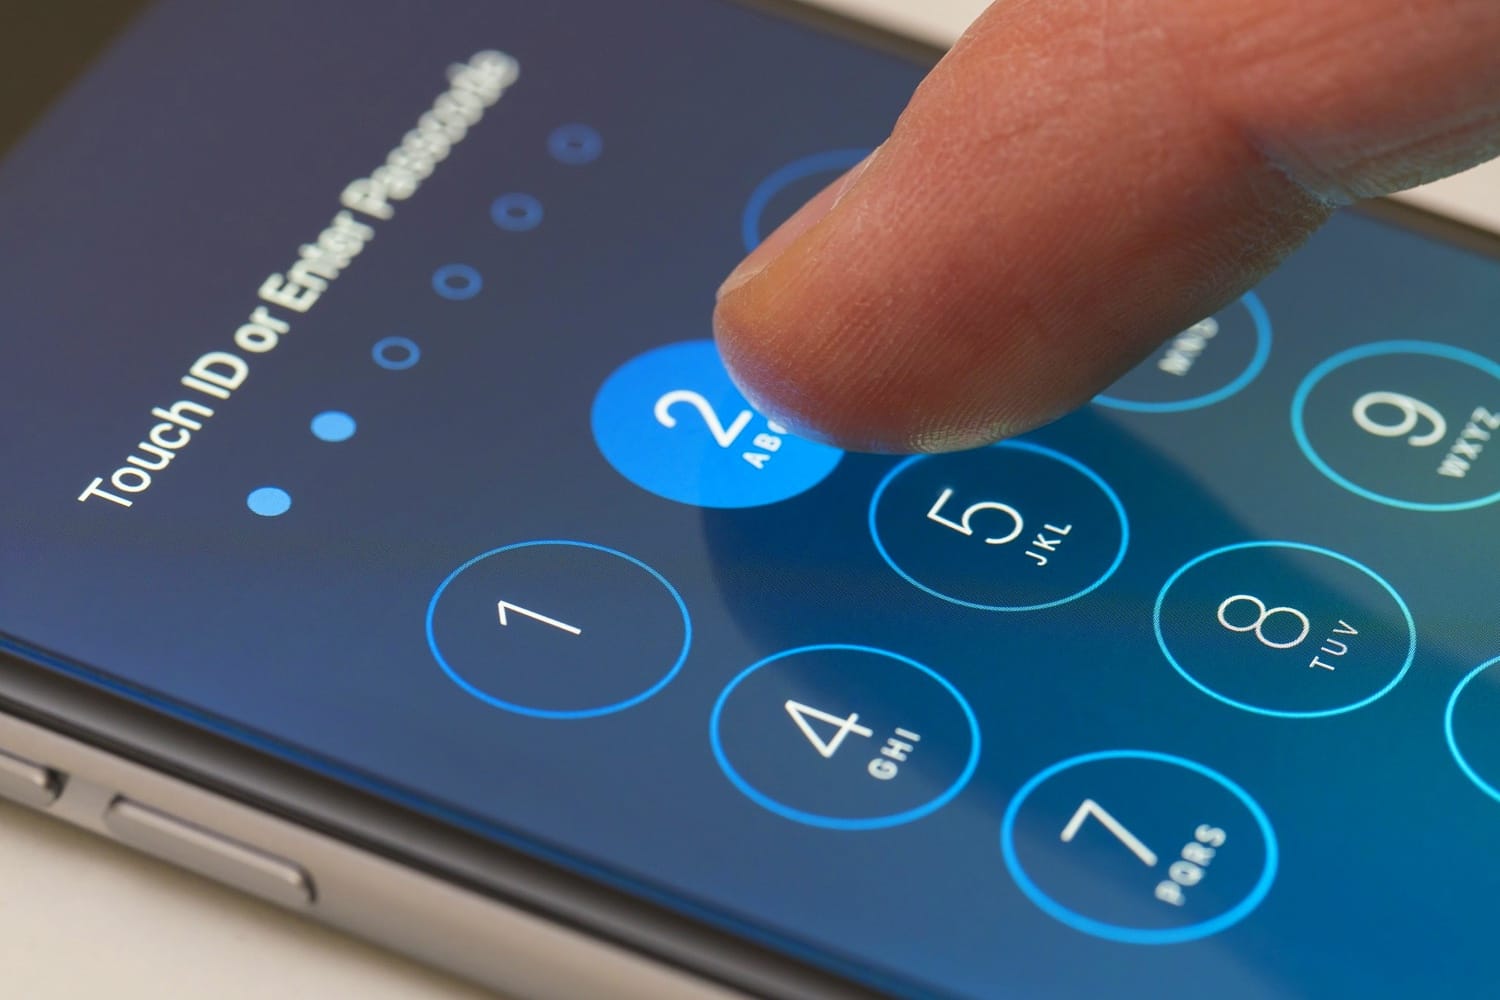 How to unlock iPhone 8, 8 Plus if you forgot your screen lock password 